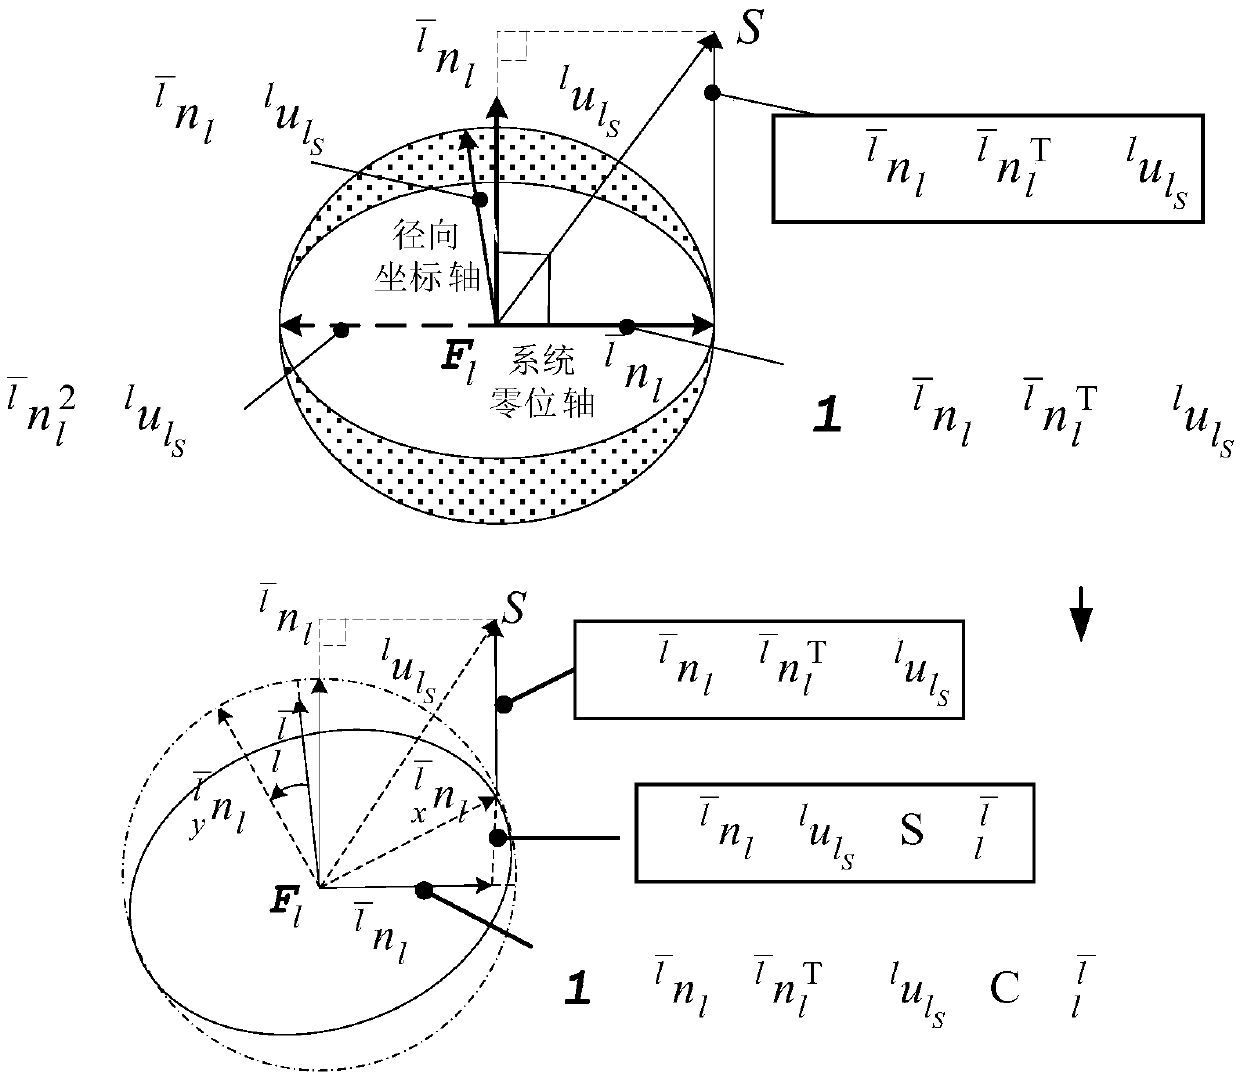 Inverse modeling and resolving method of universal 6R mechanical arm based on shaft invariant